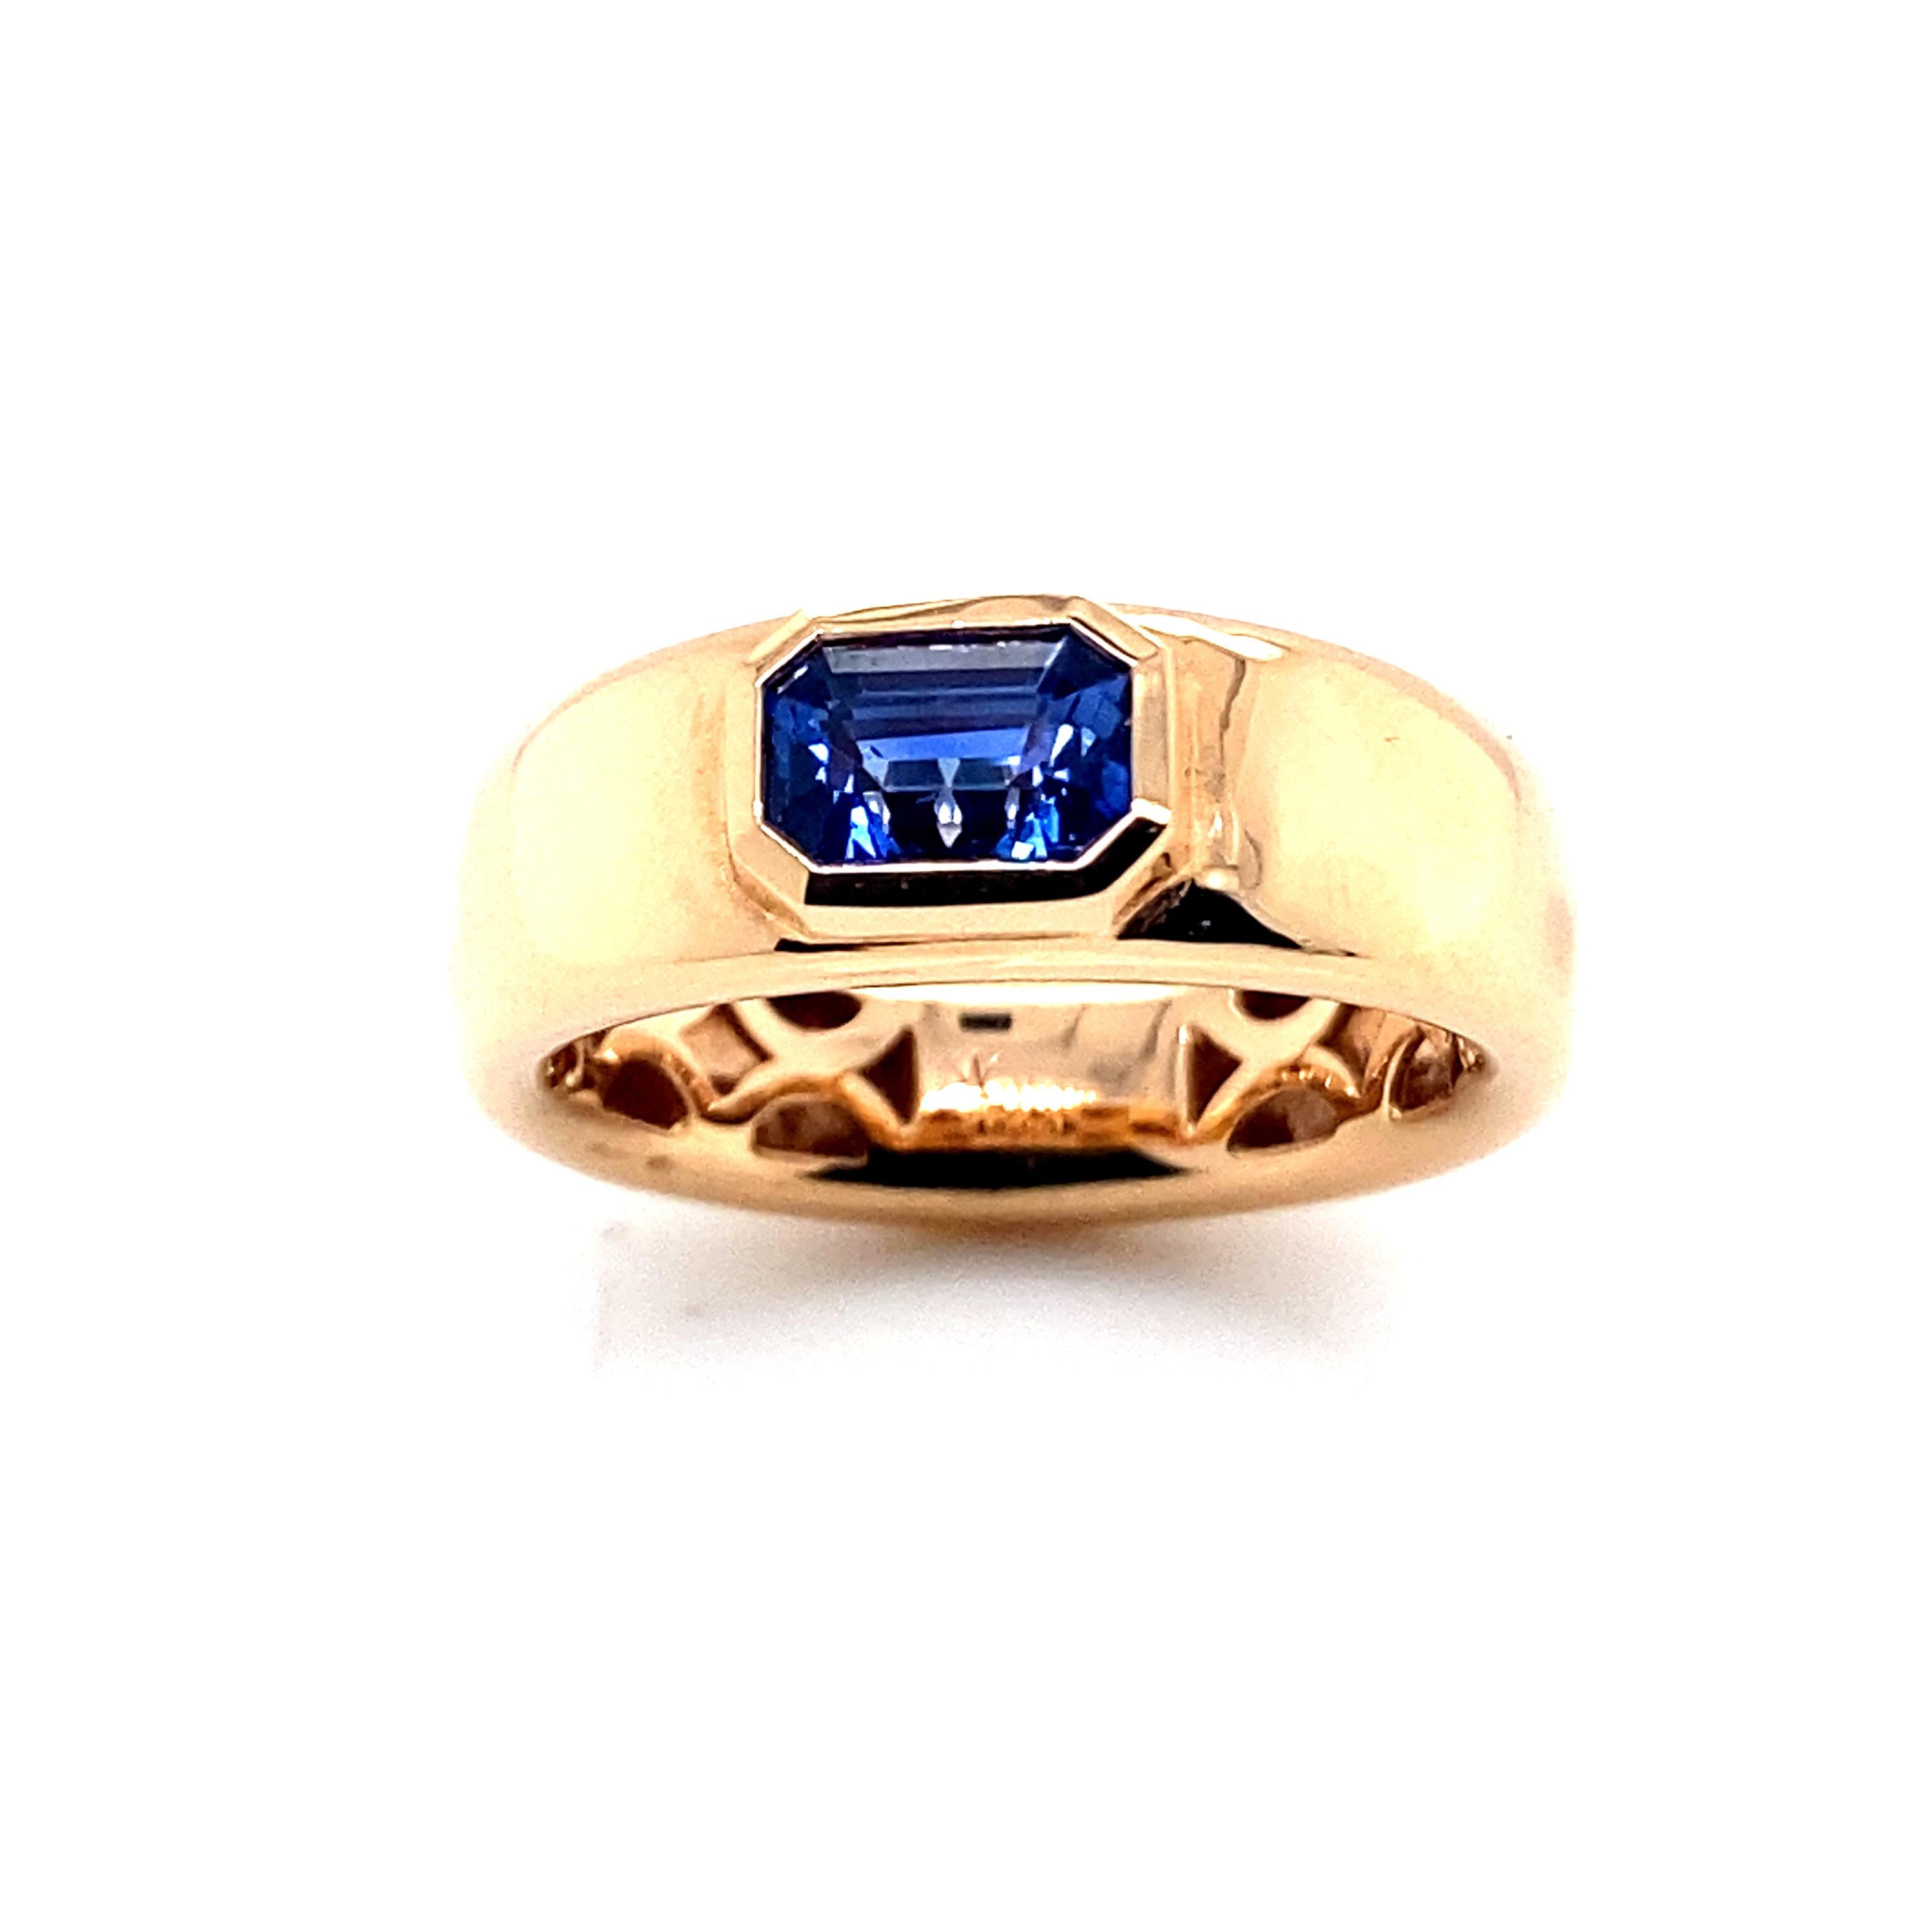 Ring with It's Blue Sapphire Emerald Cut or RPC Pink Gold 18 Karat  For Sale 1